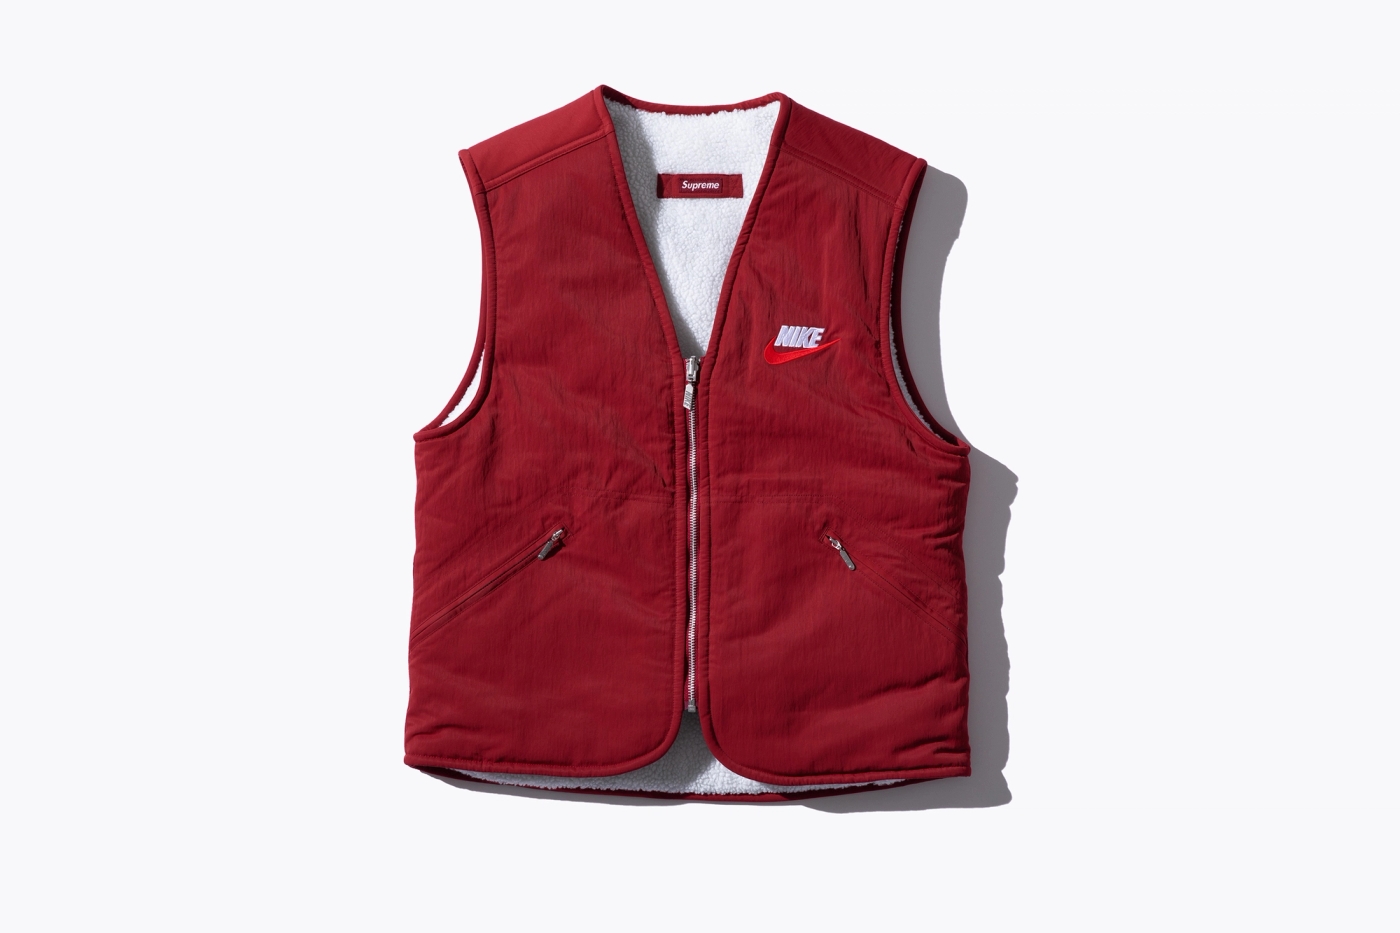 Reversible Nylon Vest with sherpa fleece lining and embroidered logos. (17/38)